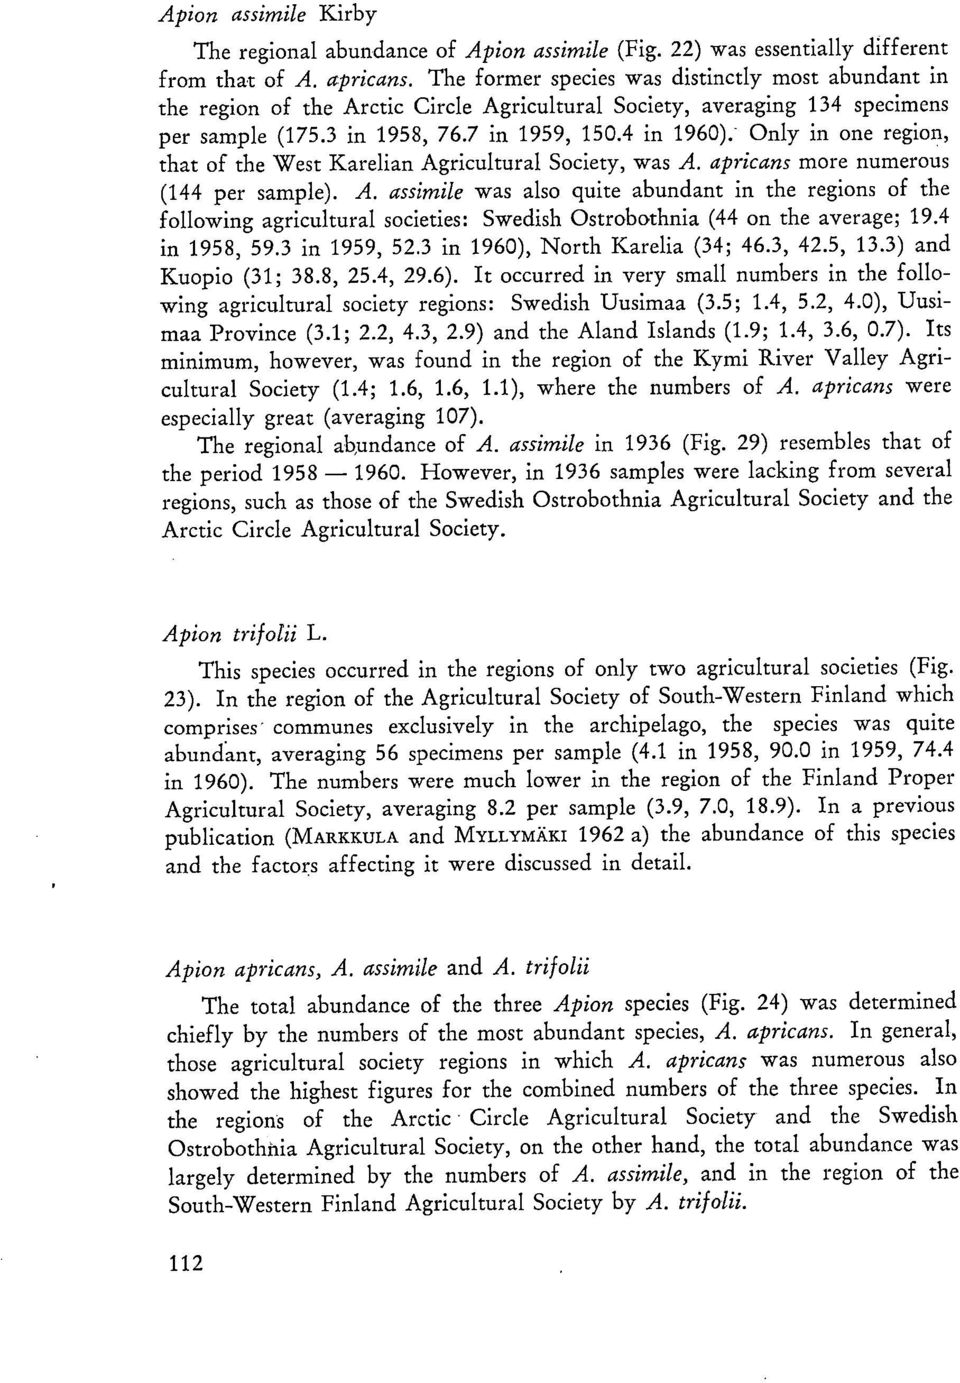 Only in one region, that of the West Karelian Agricultural Society, was A. apricans more numerous (144 per sample). A. assimile was also quite abundant in the regions of the following agricultural societies: Swedish Ostrobothnia (44 on the average; 19.